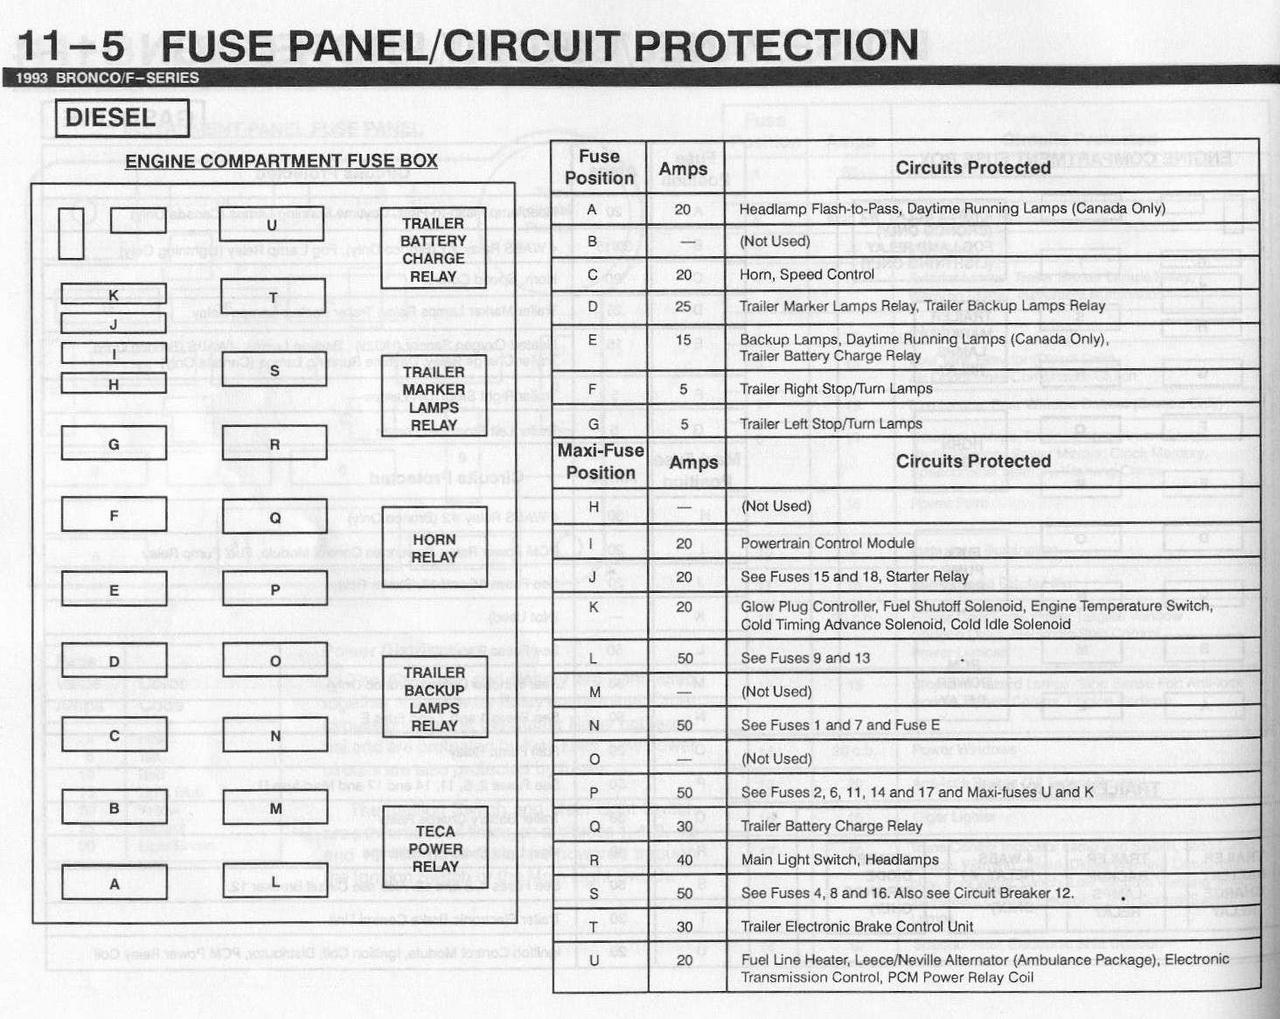 1993 Ford f250 service manual #8